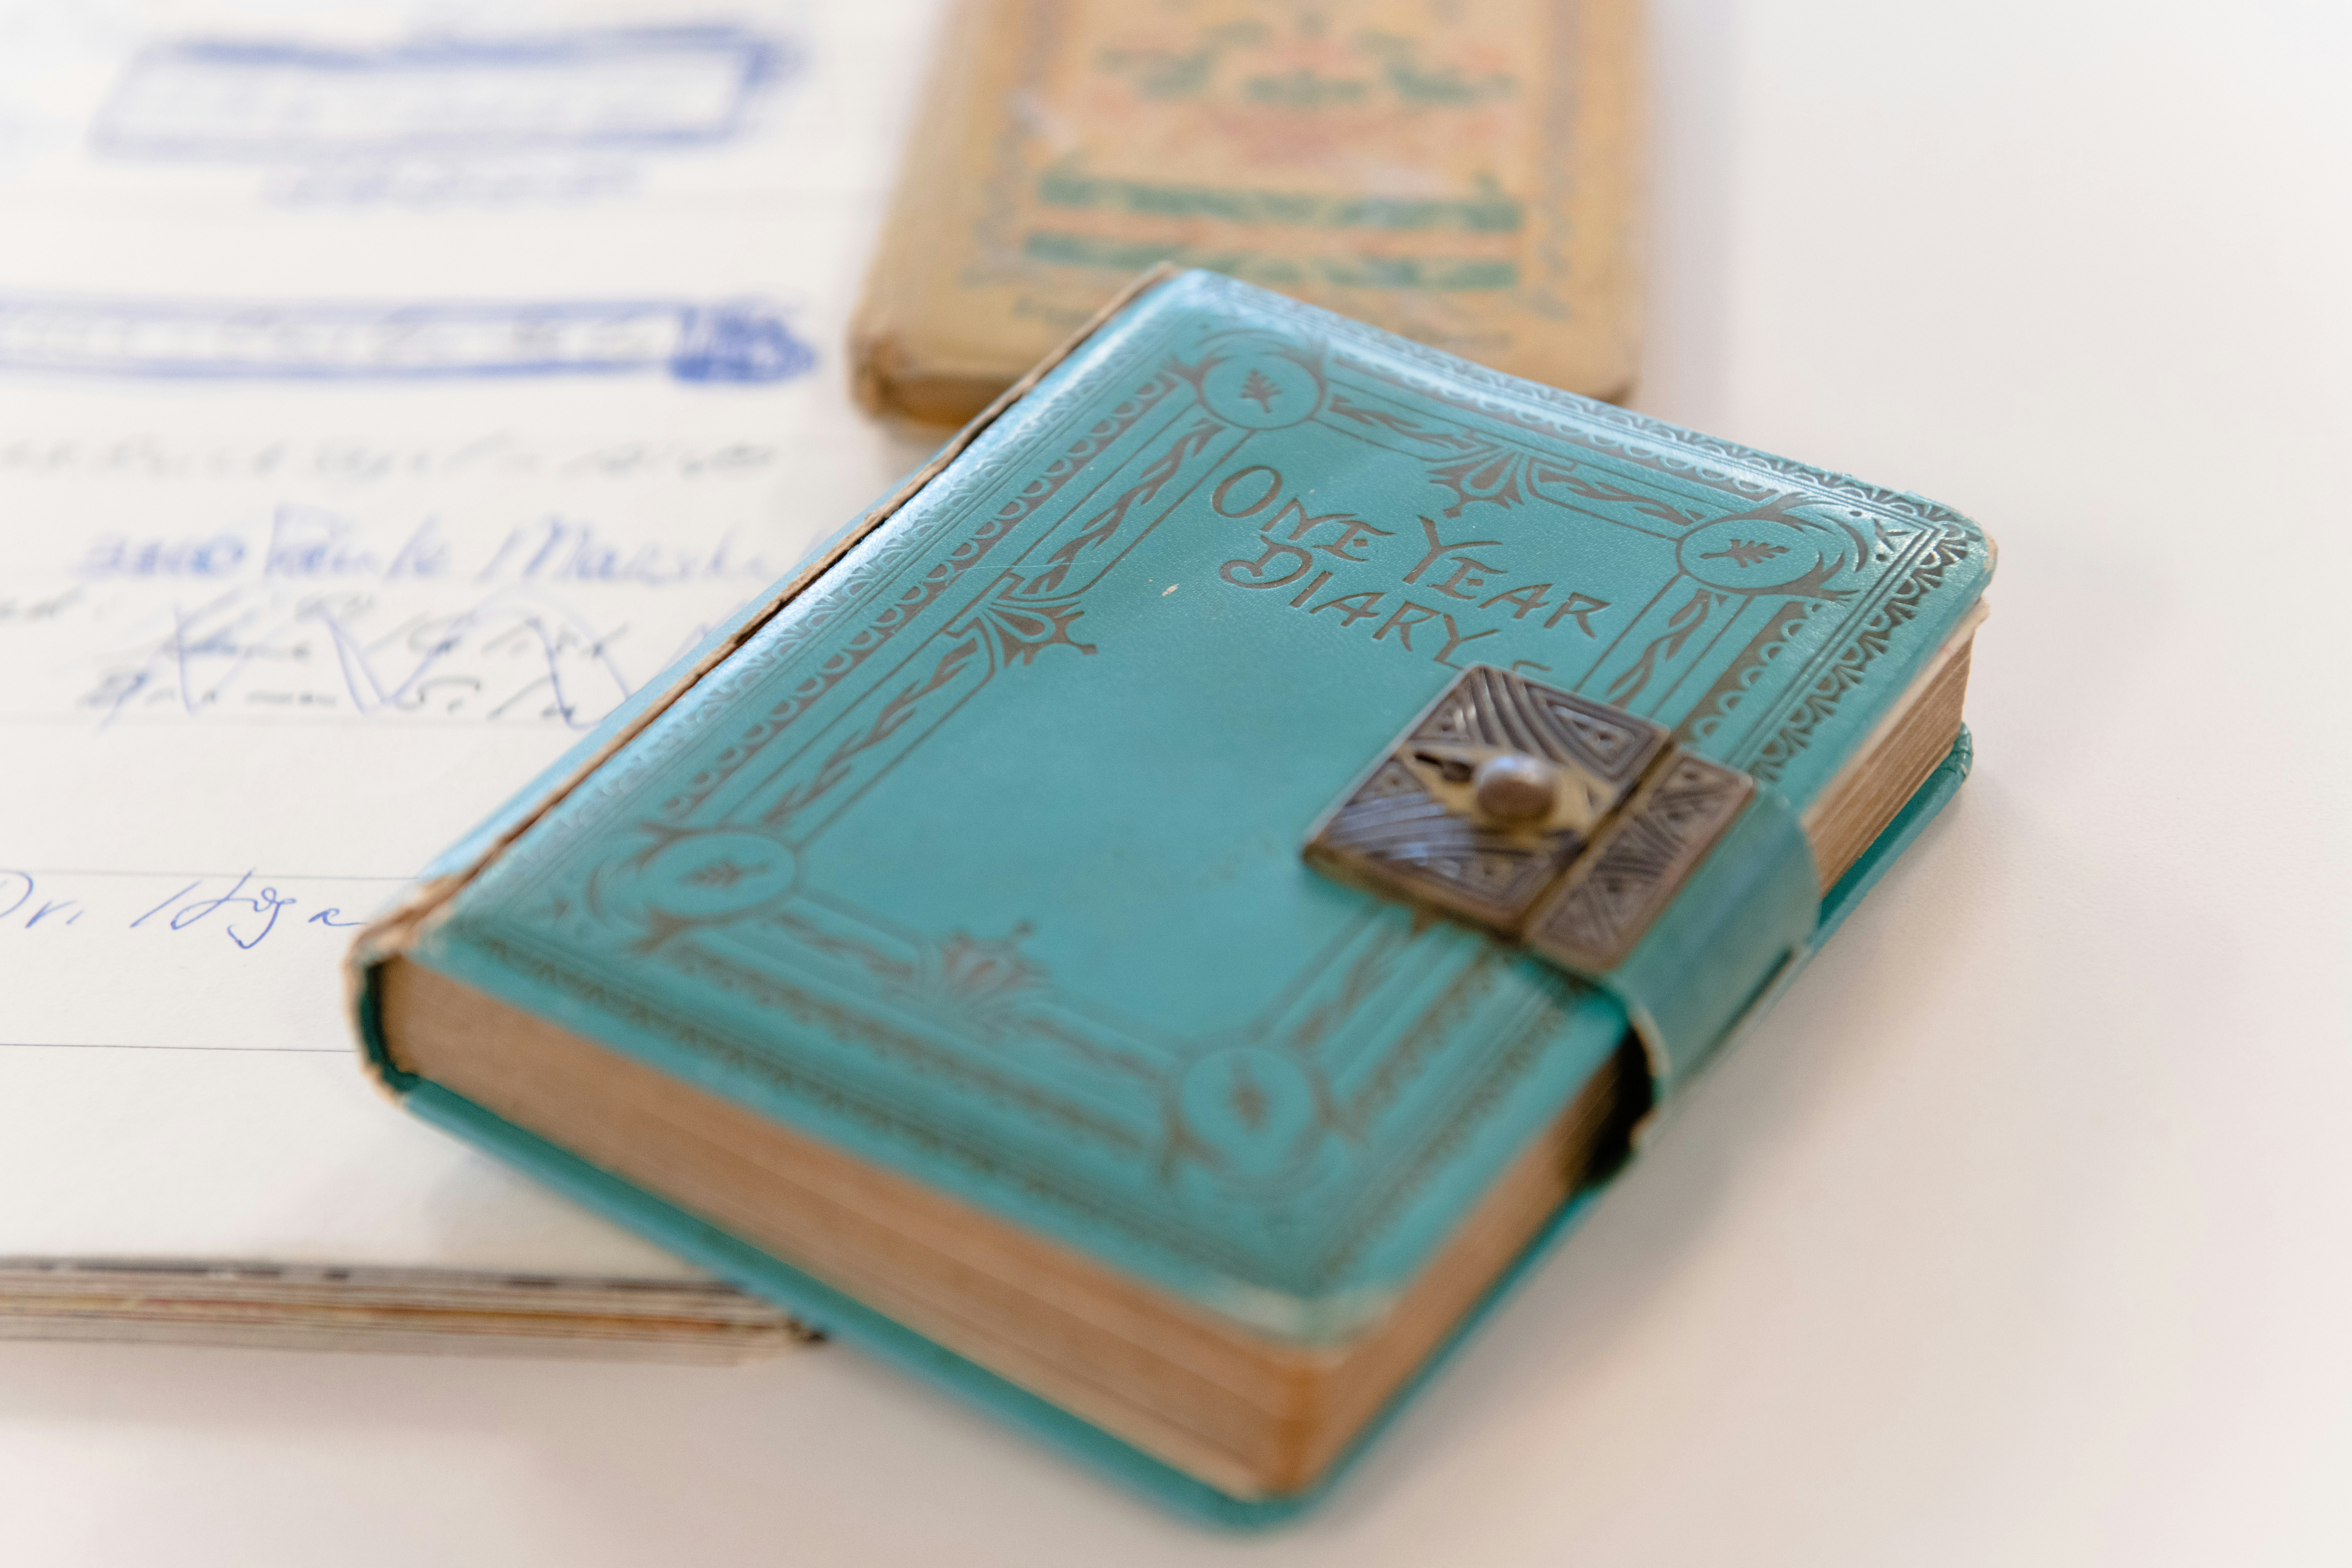 A small, self-locking diary with gold-edged pages. In gold lettering, it reads "One Year Diary"